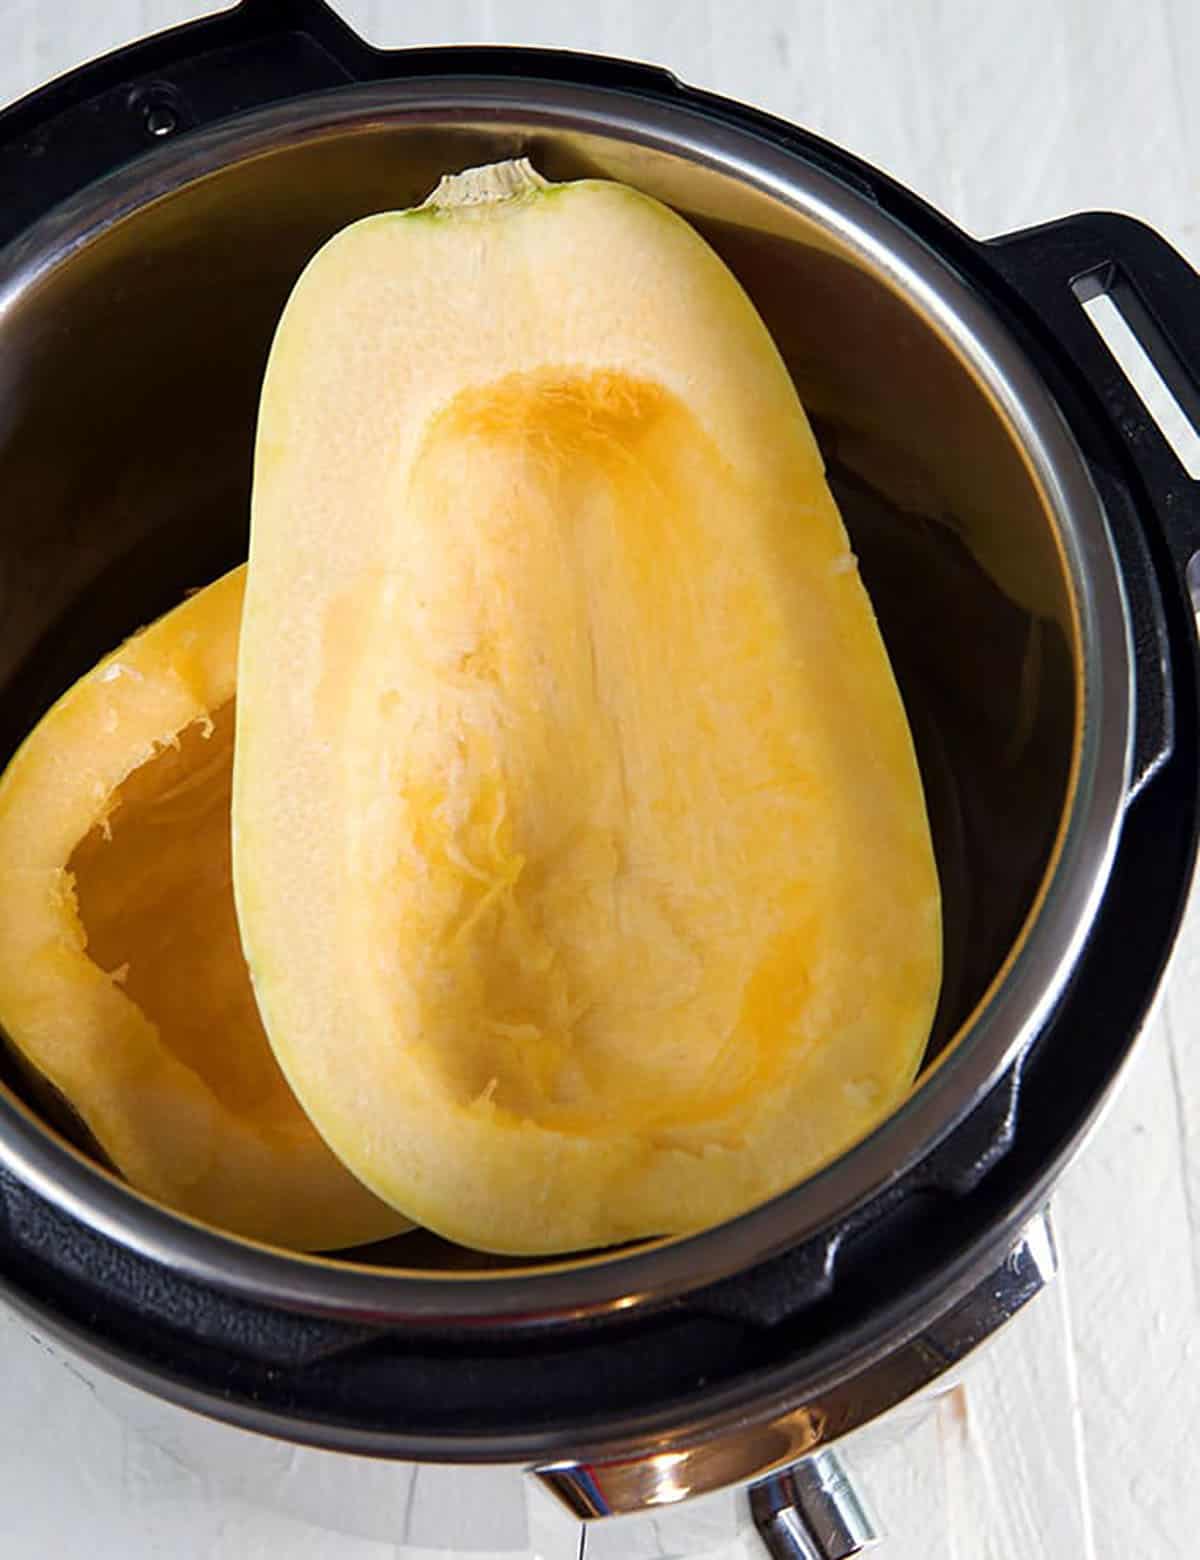 Two seedless squash halves are placed in the Instant Pot.